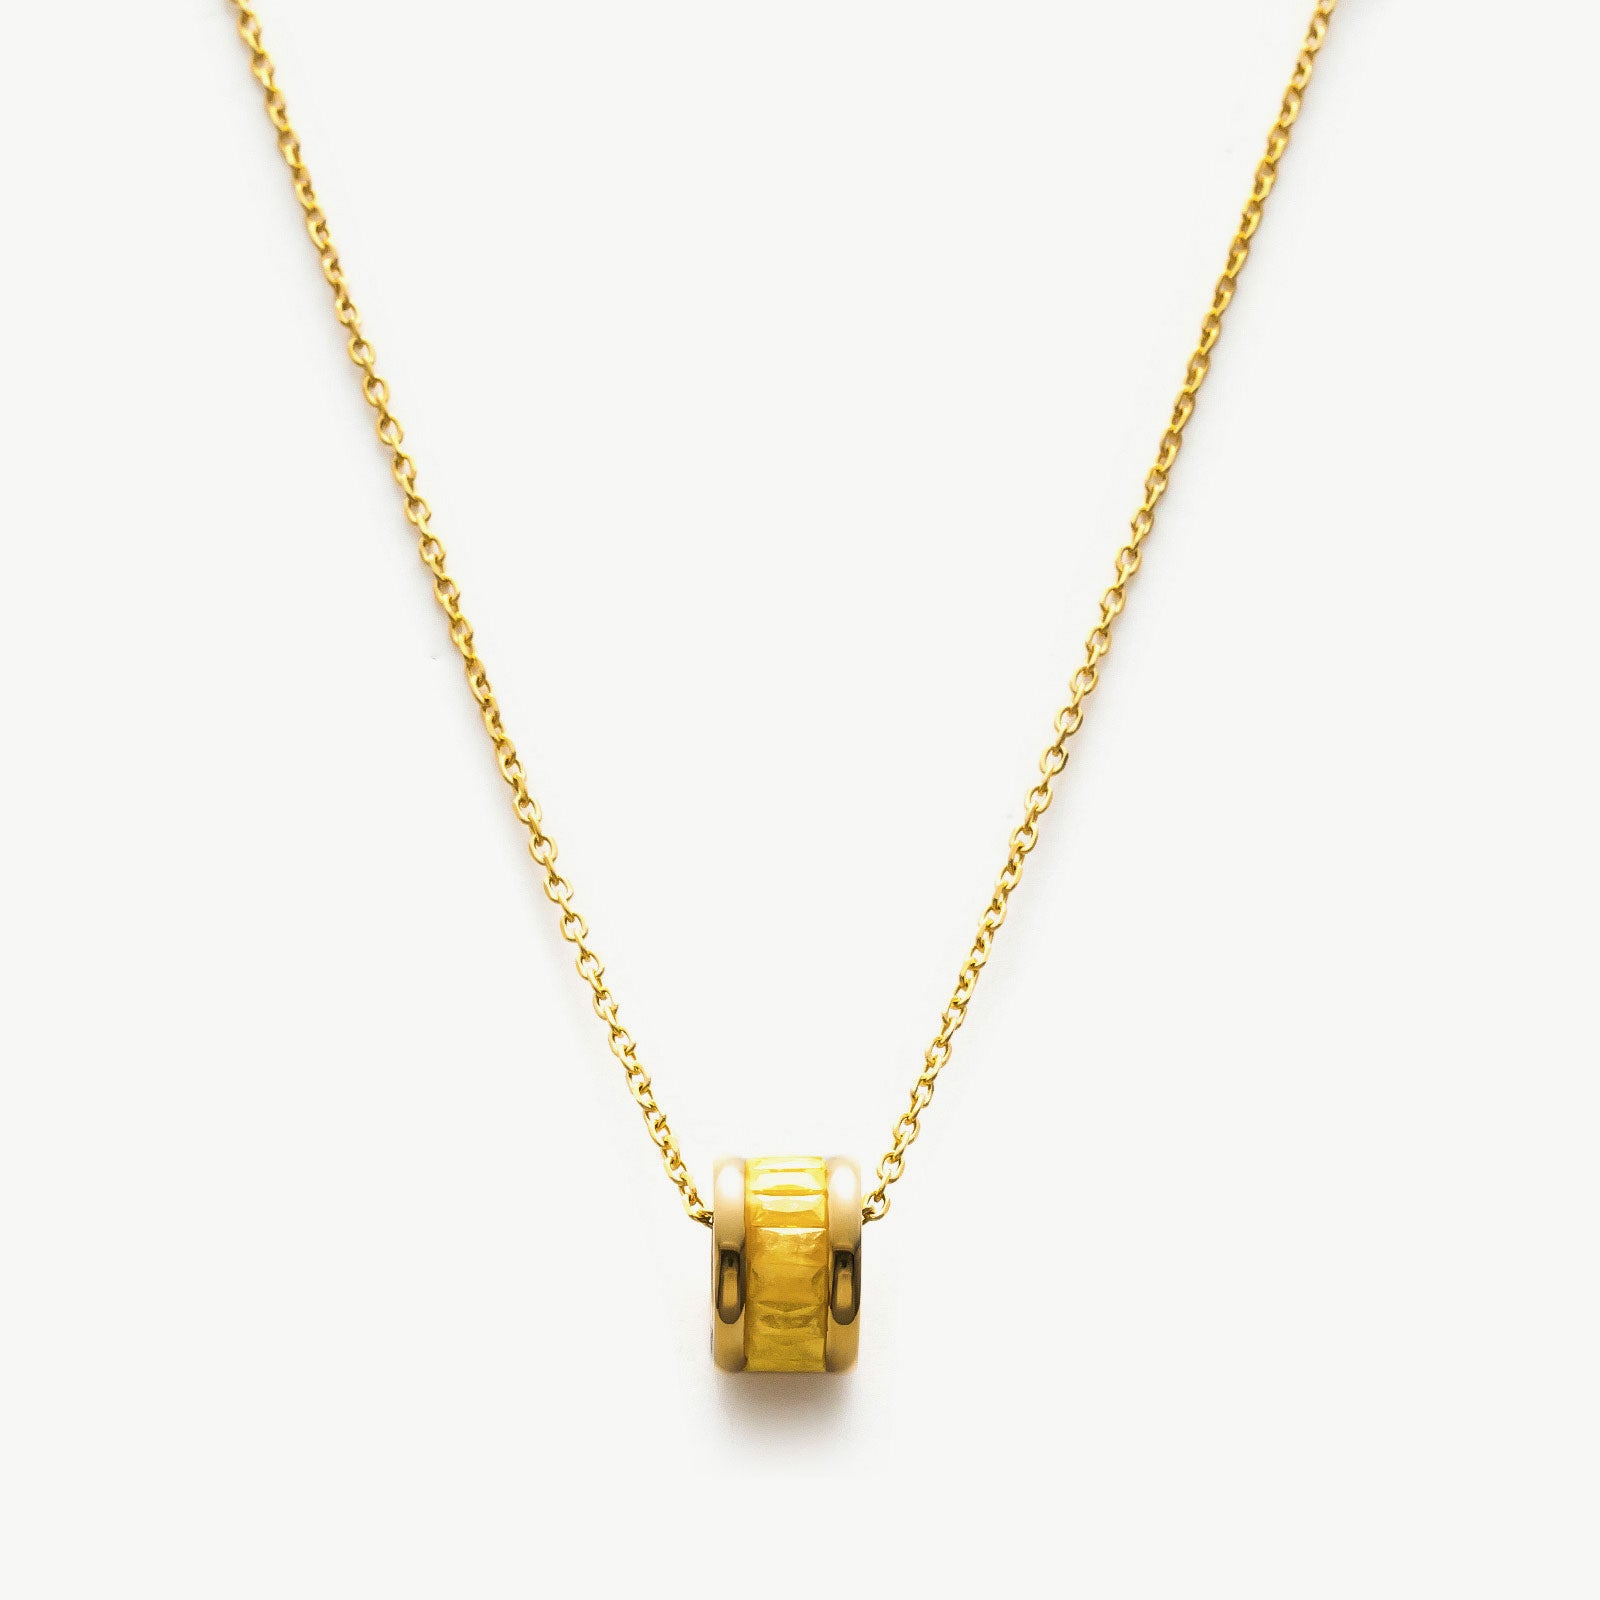 Yellow Ring Pendant Chain Necklace, a symbol of sunshine radiance, featuring a vibrant yellow ring pendant suspended from a delicate chain, creating a cheerful and eye-catching accessory for any occasion